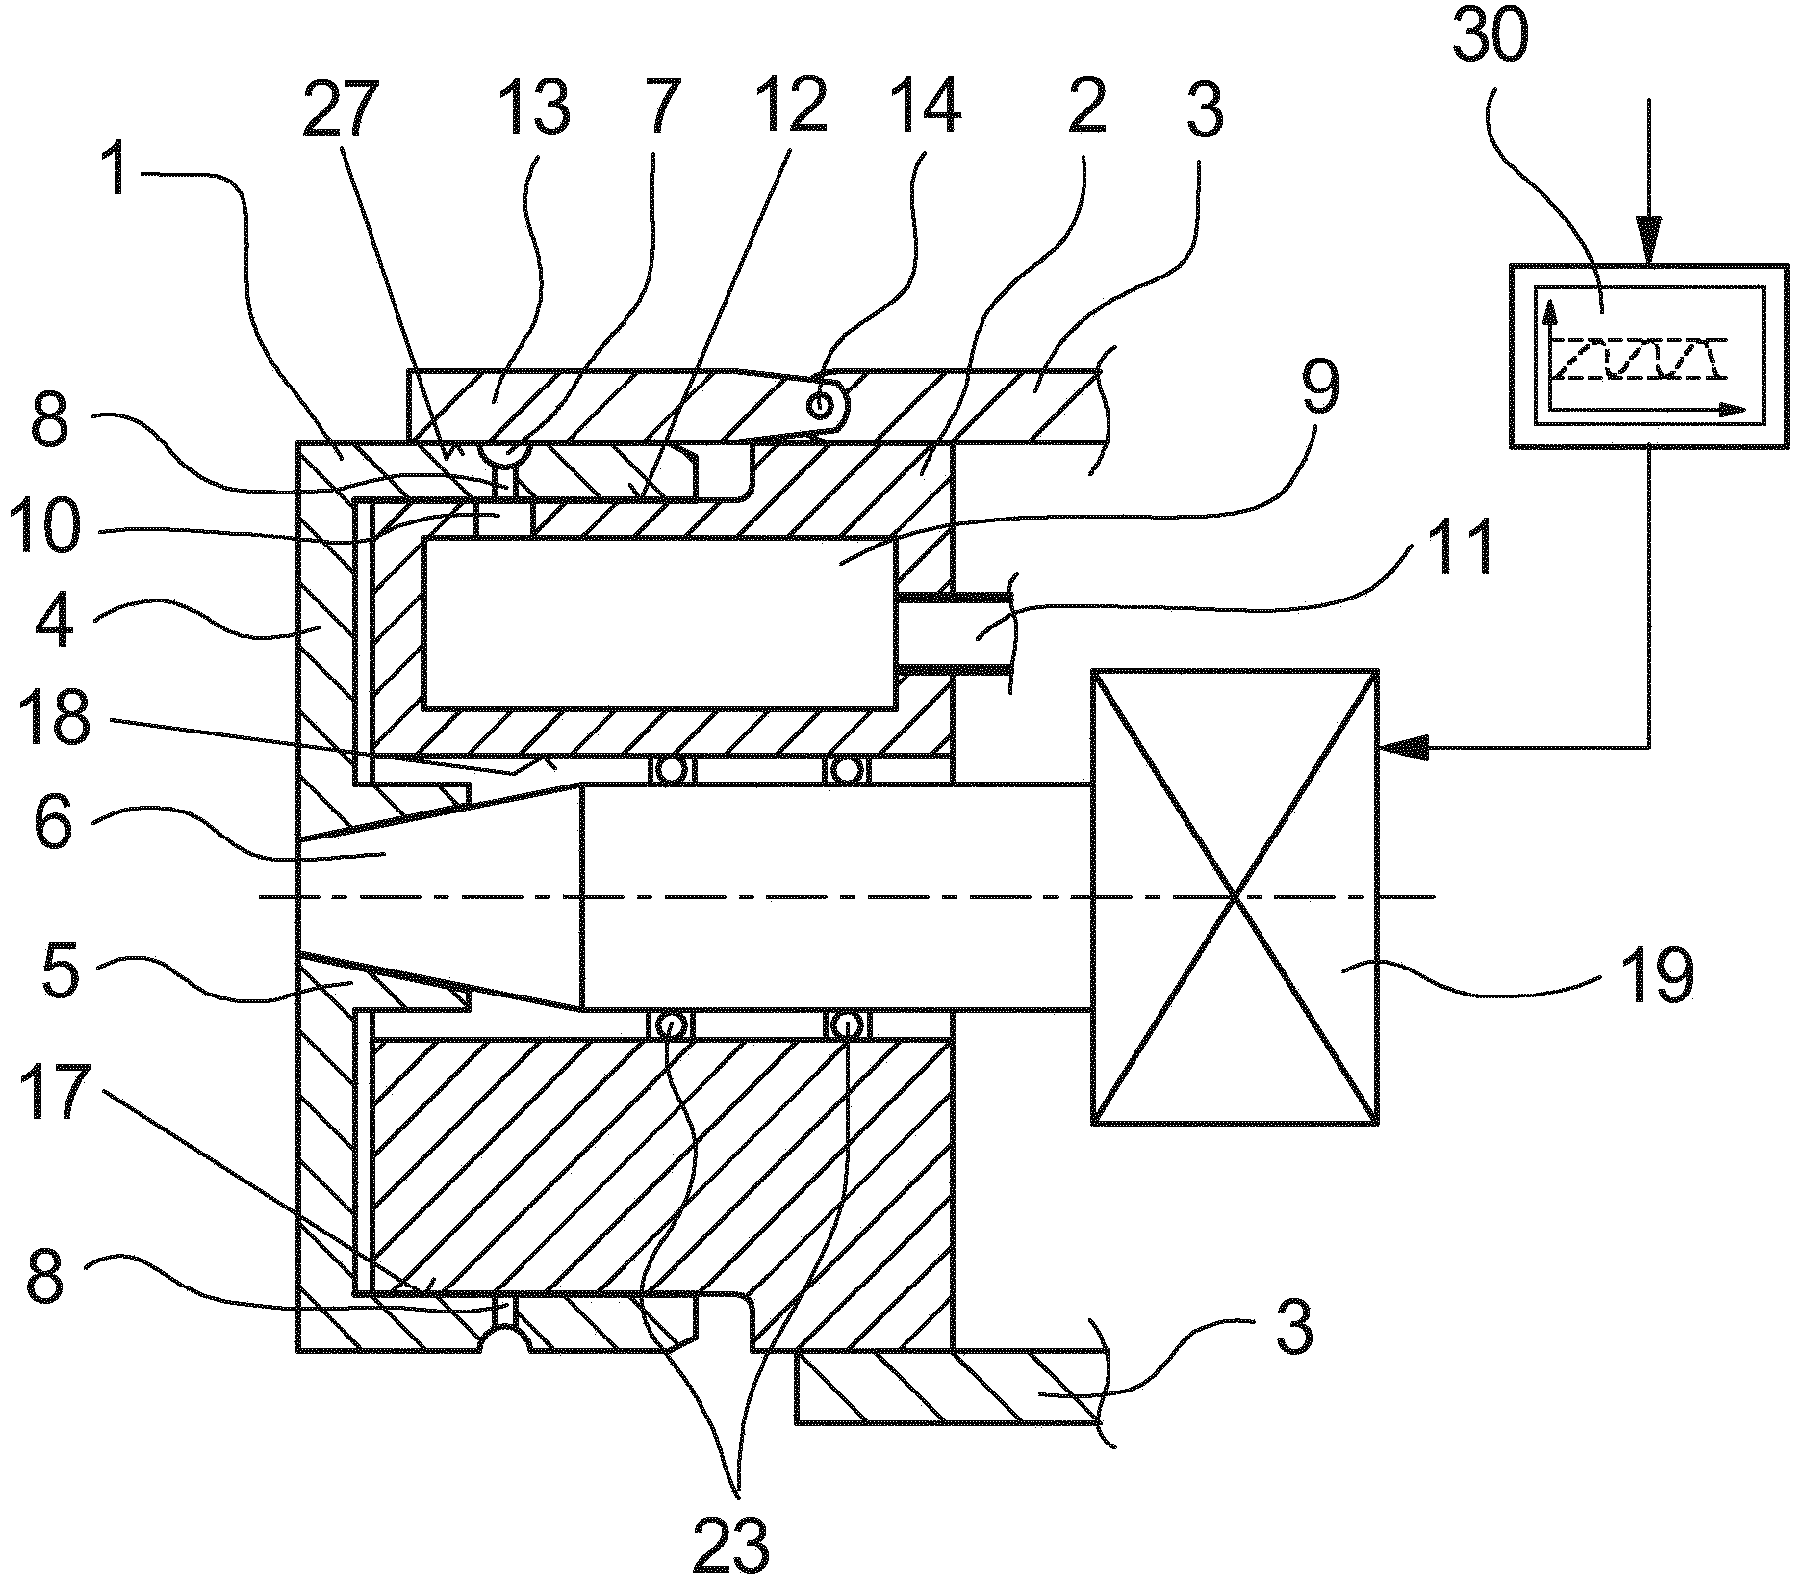 Method and apparatus for producing intertwining knots in a multifilament thread